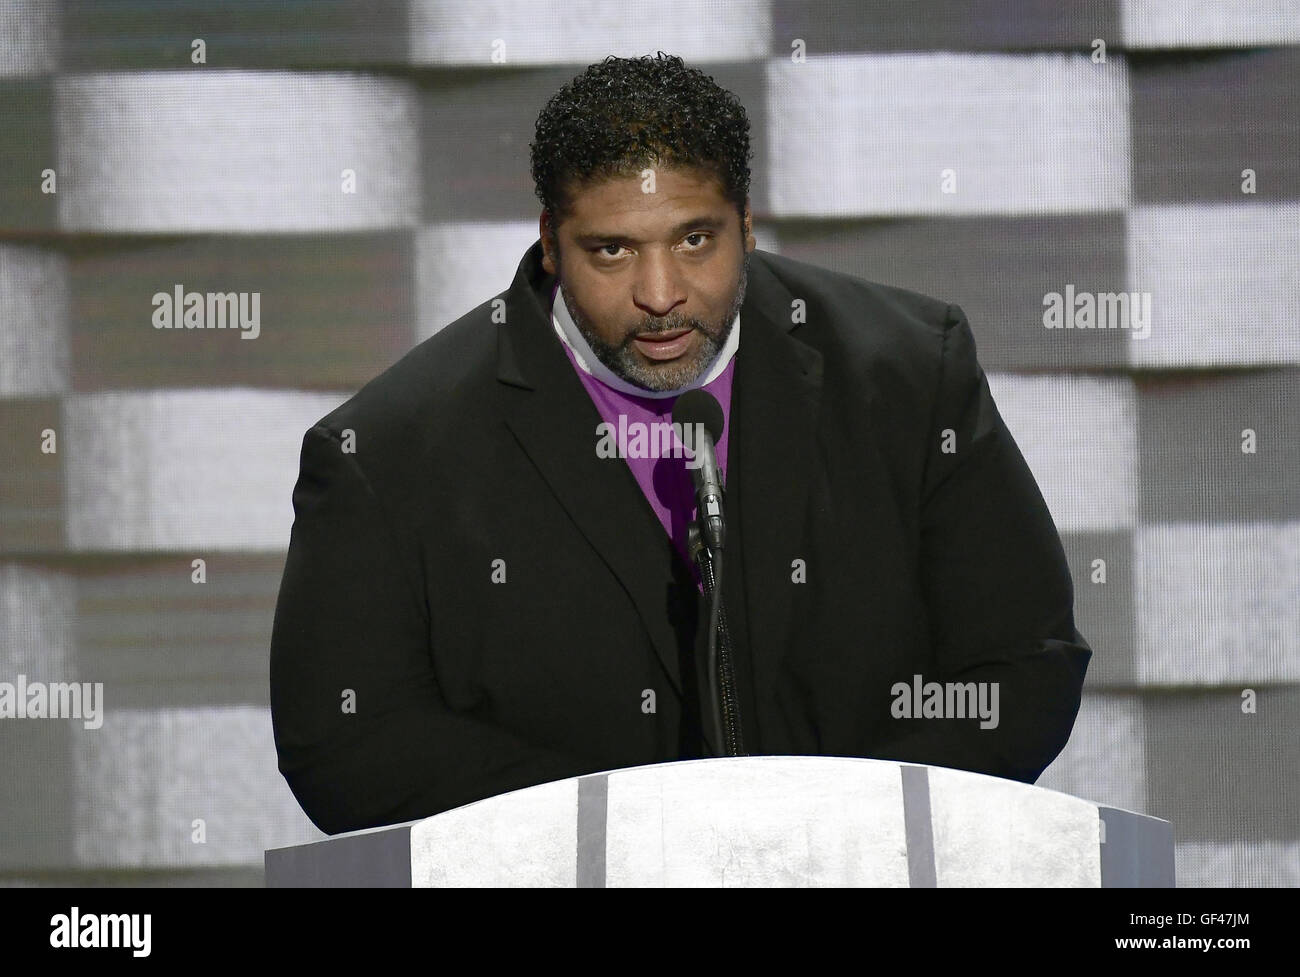 Philadelphia, Pennsylvania, USA. 28th July, 2016. Reverend Doctor William Barber II of North Carolina makes remarks during the fourth session of the 2016 Democratic National Convention at the Wells Fargo Center in Philadelphia, Pennsylvania on Thursday, July 28, 2016.Credit: Ron Sachs/CNP. © Ron Sachs/CNP/ZUMA Wire/Alamy Live News Stock Photo